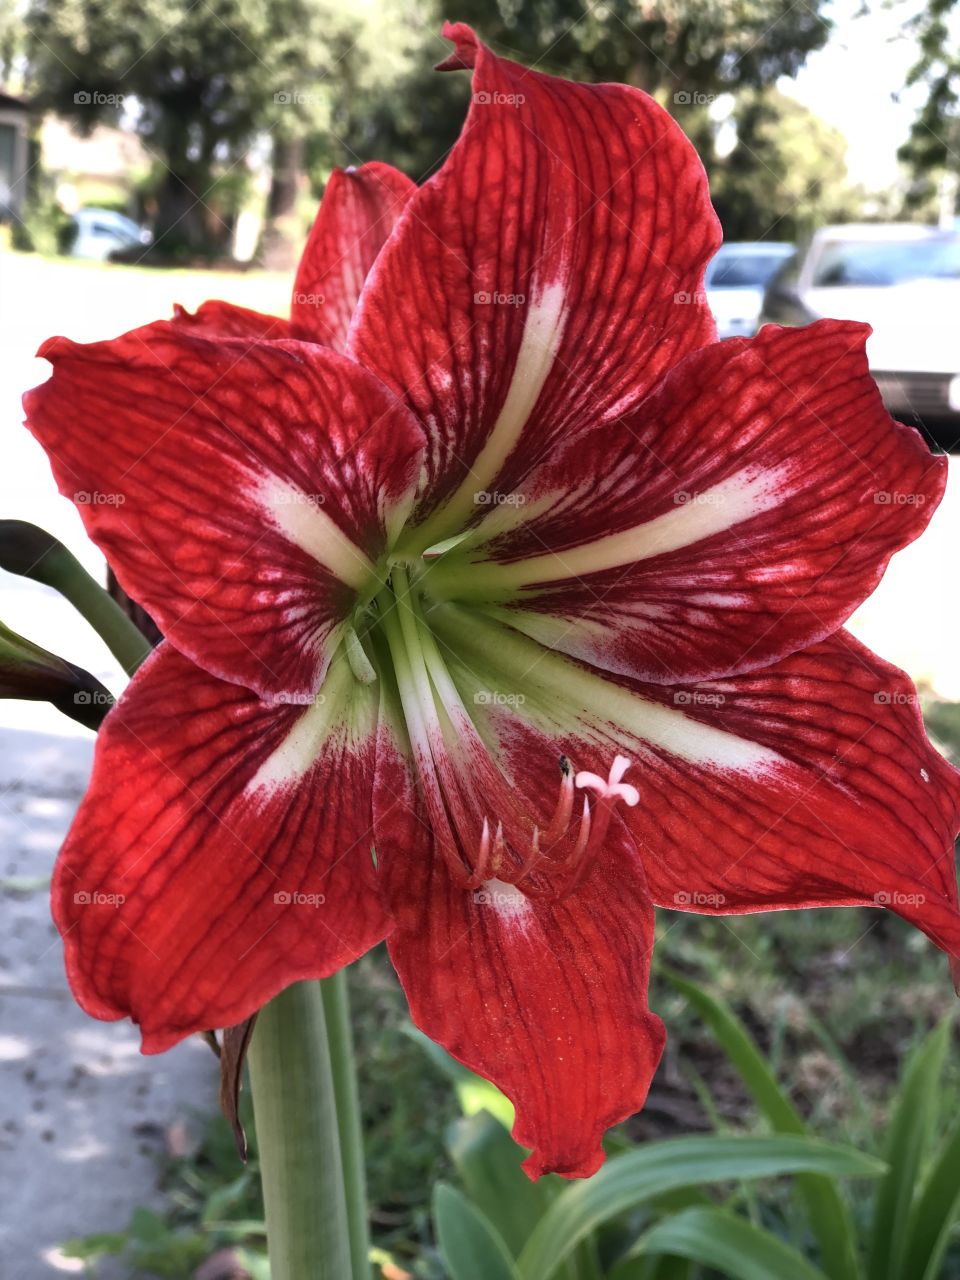 Gorgeous red flower blooming on a hot and sunny summer day in Southern California 